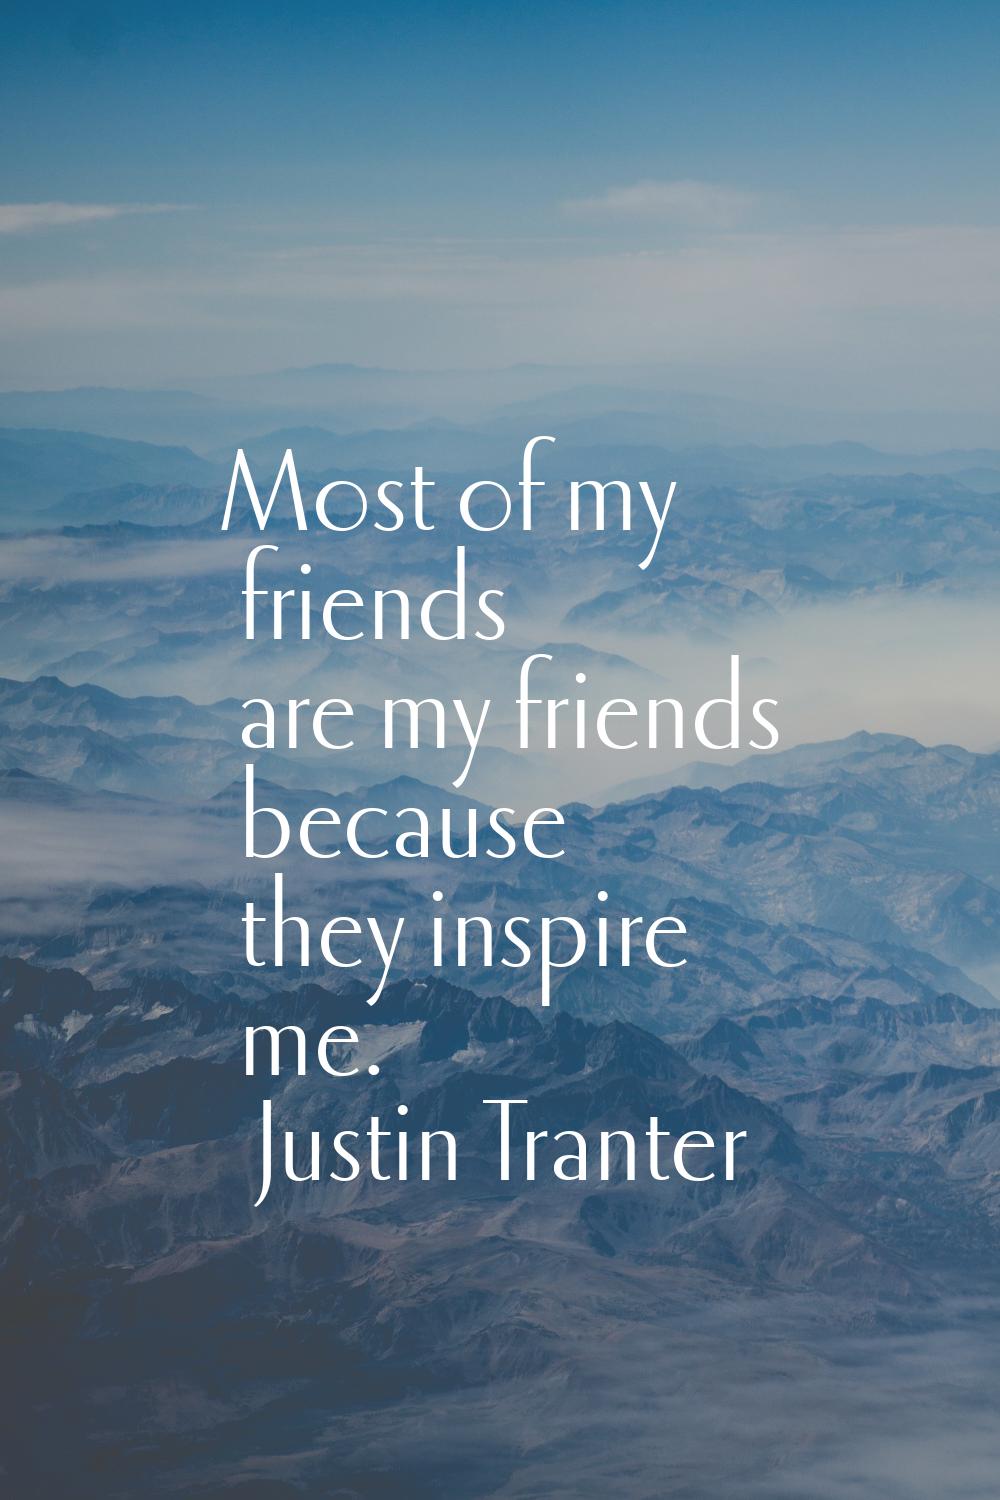 Most of my friends are my friends because they inspire me.